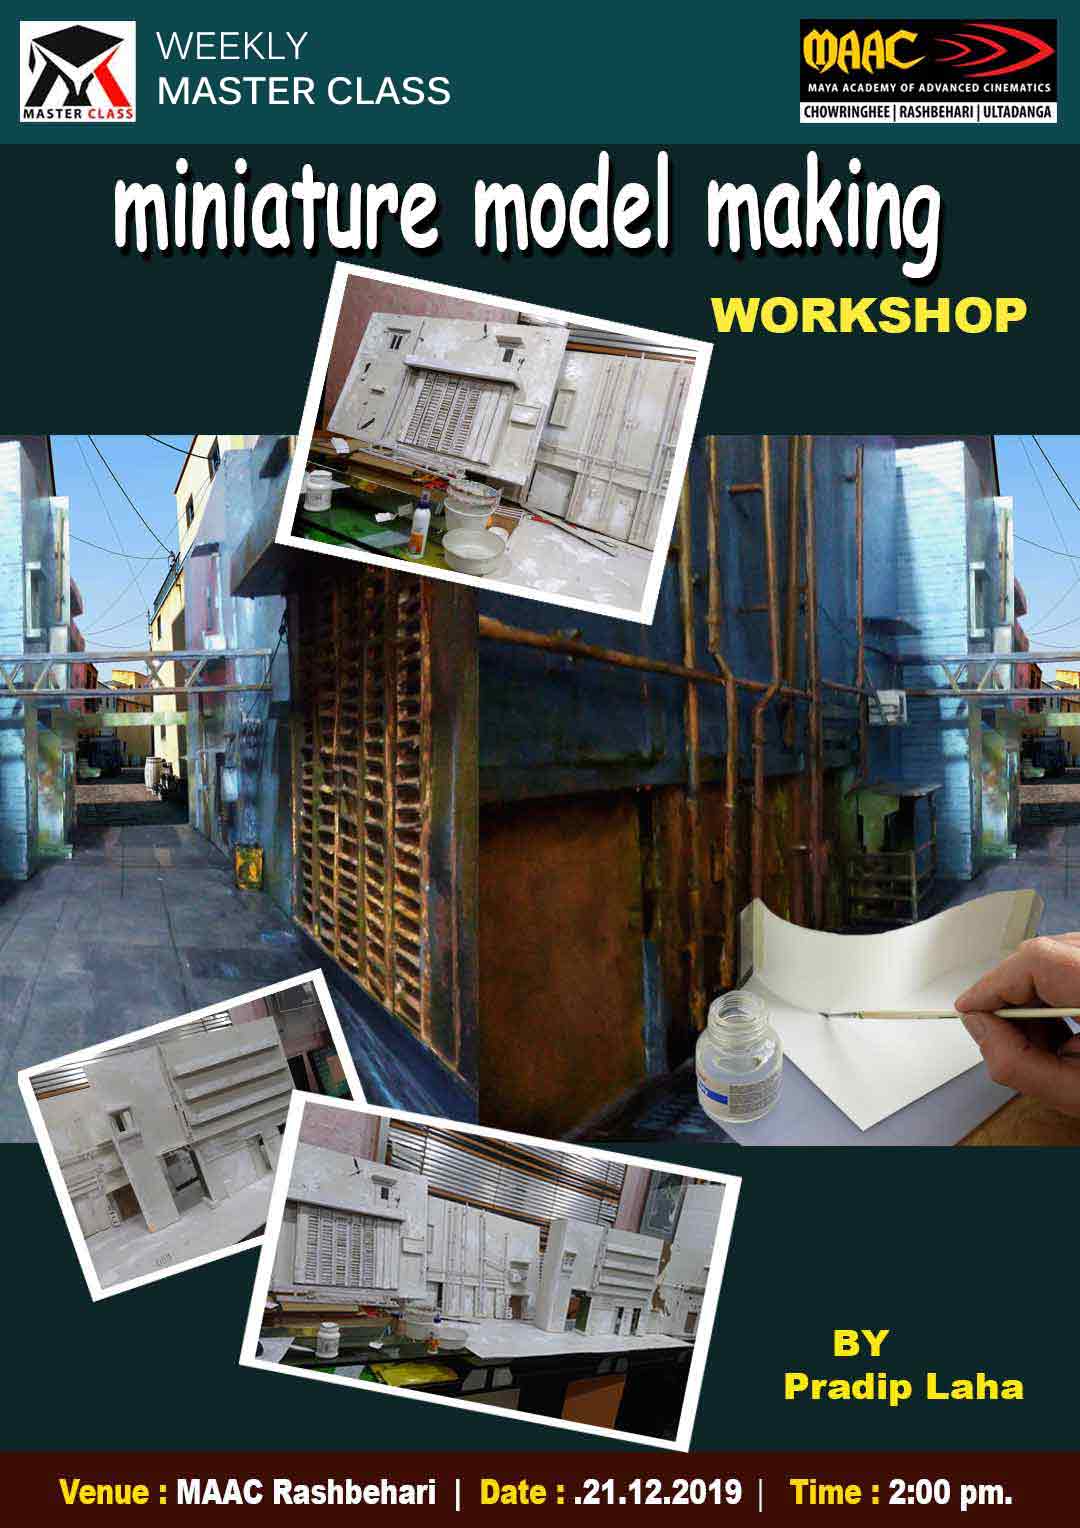 Weekly Master Class on Miniature Model Making Workshop